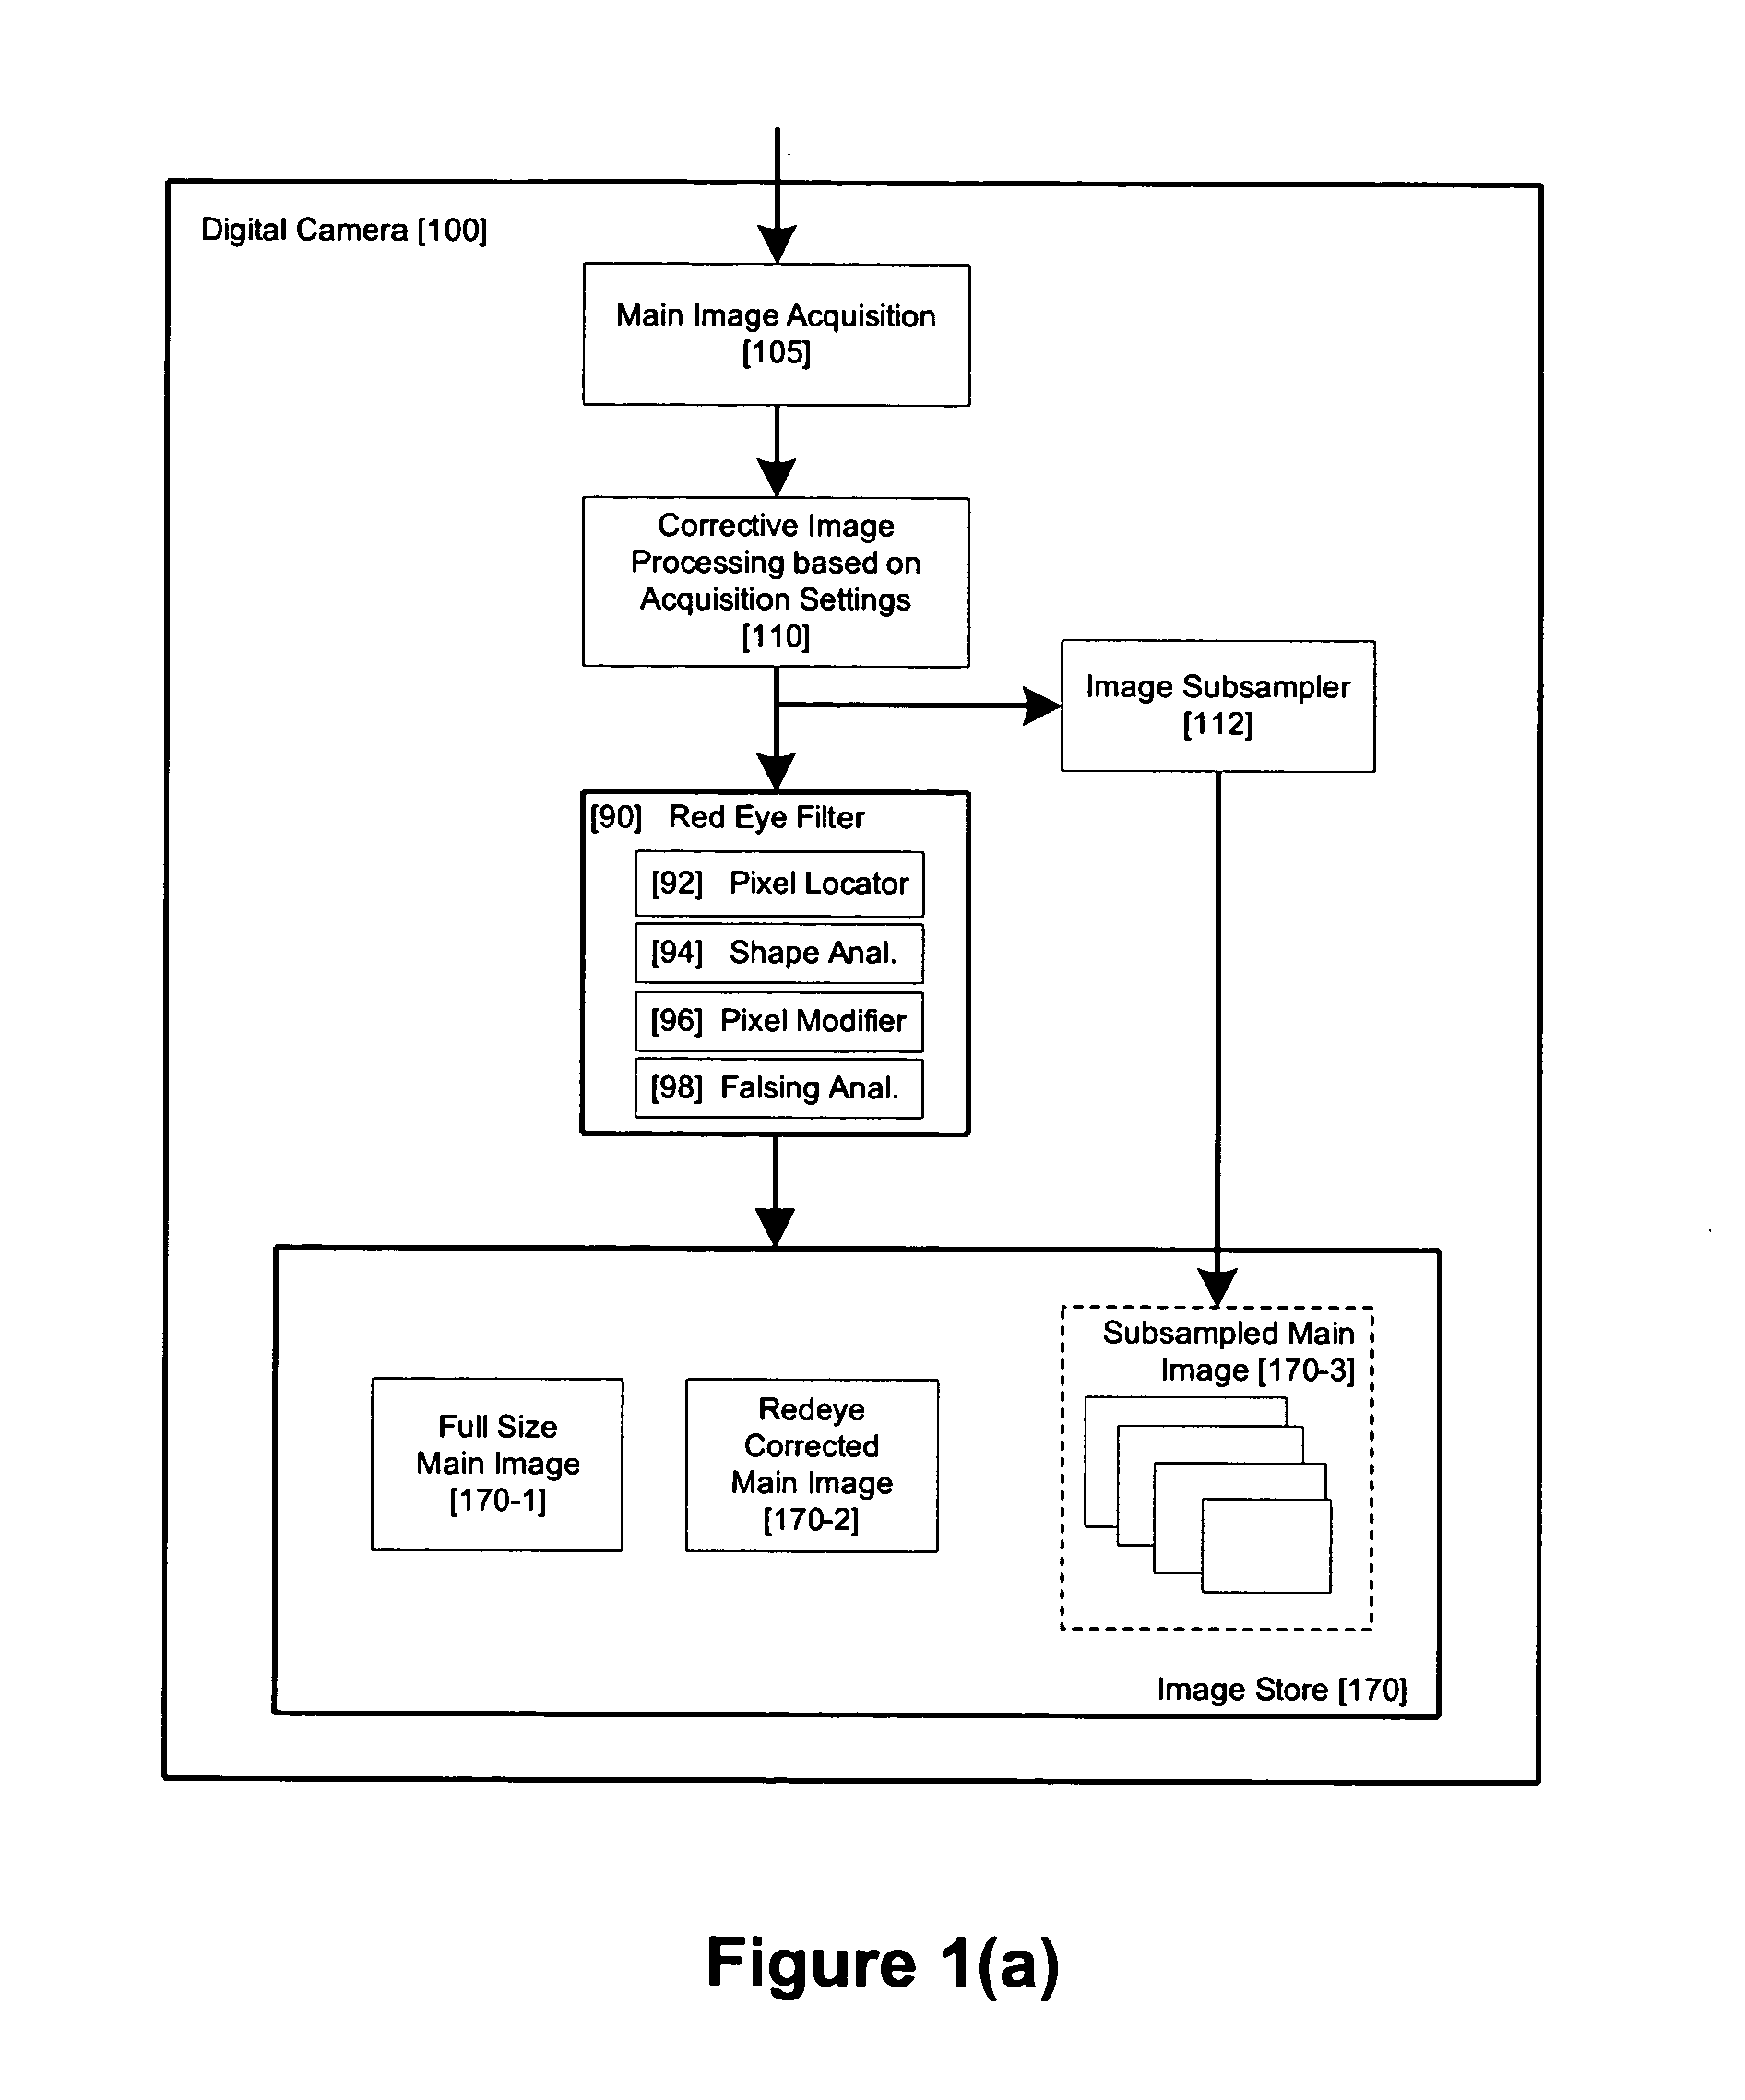 Method and apparatus for red-eye detection in an acquired digital image using face recognition